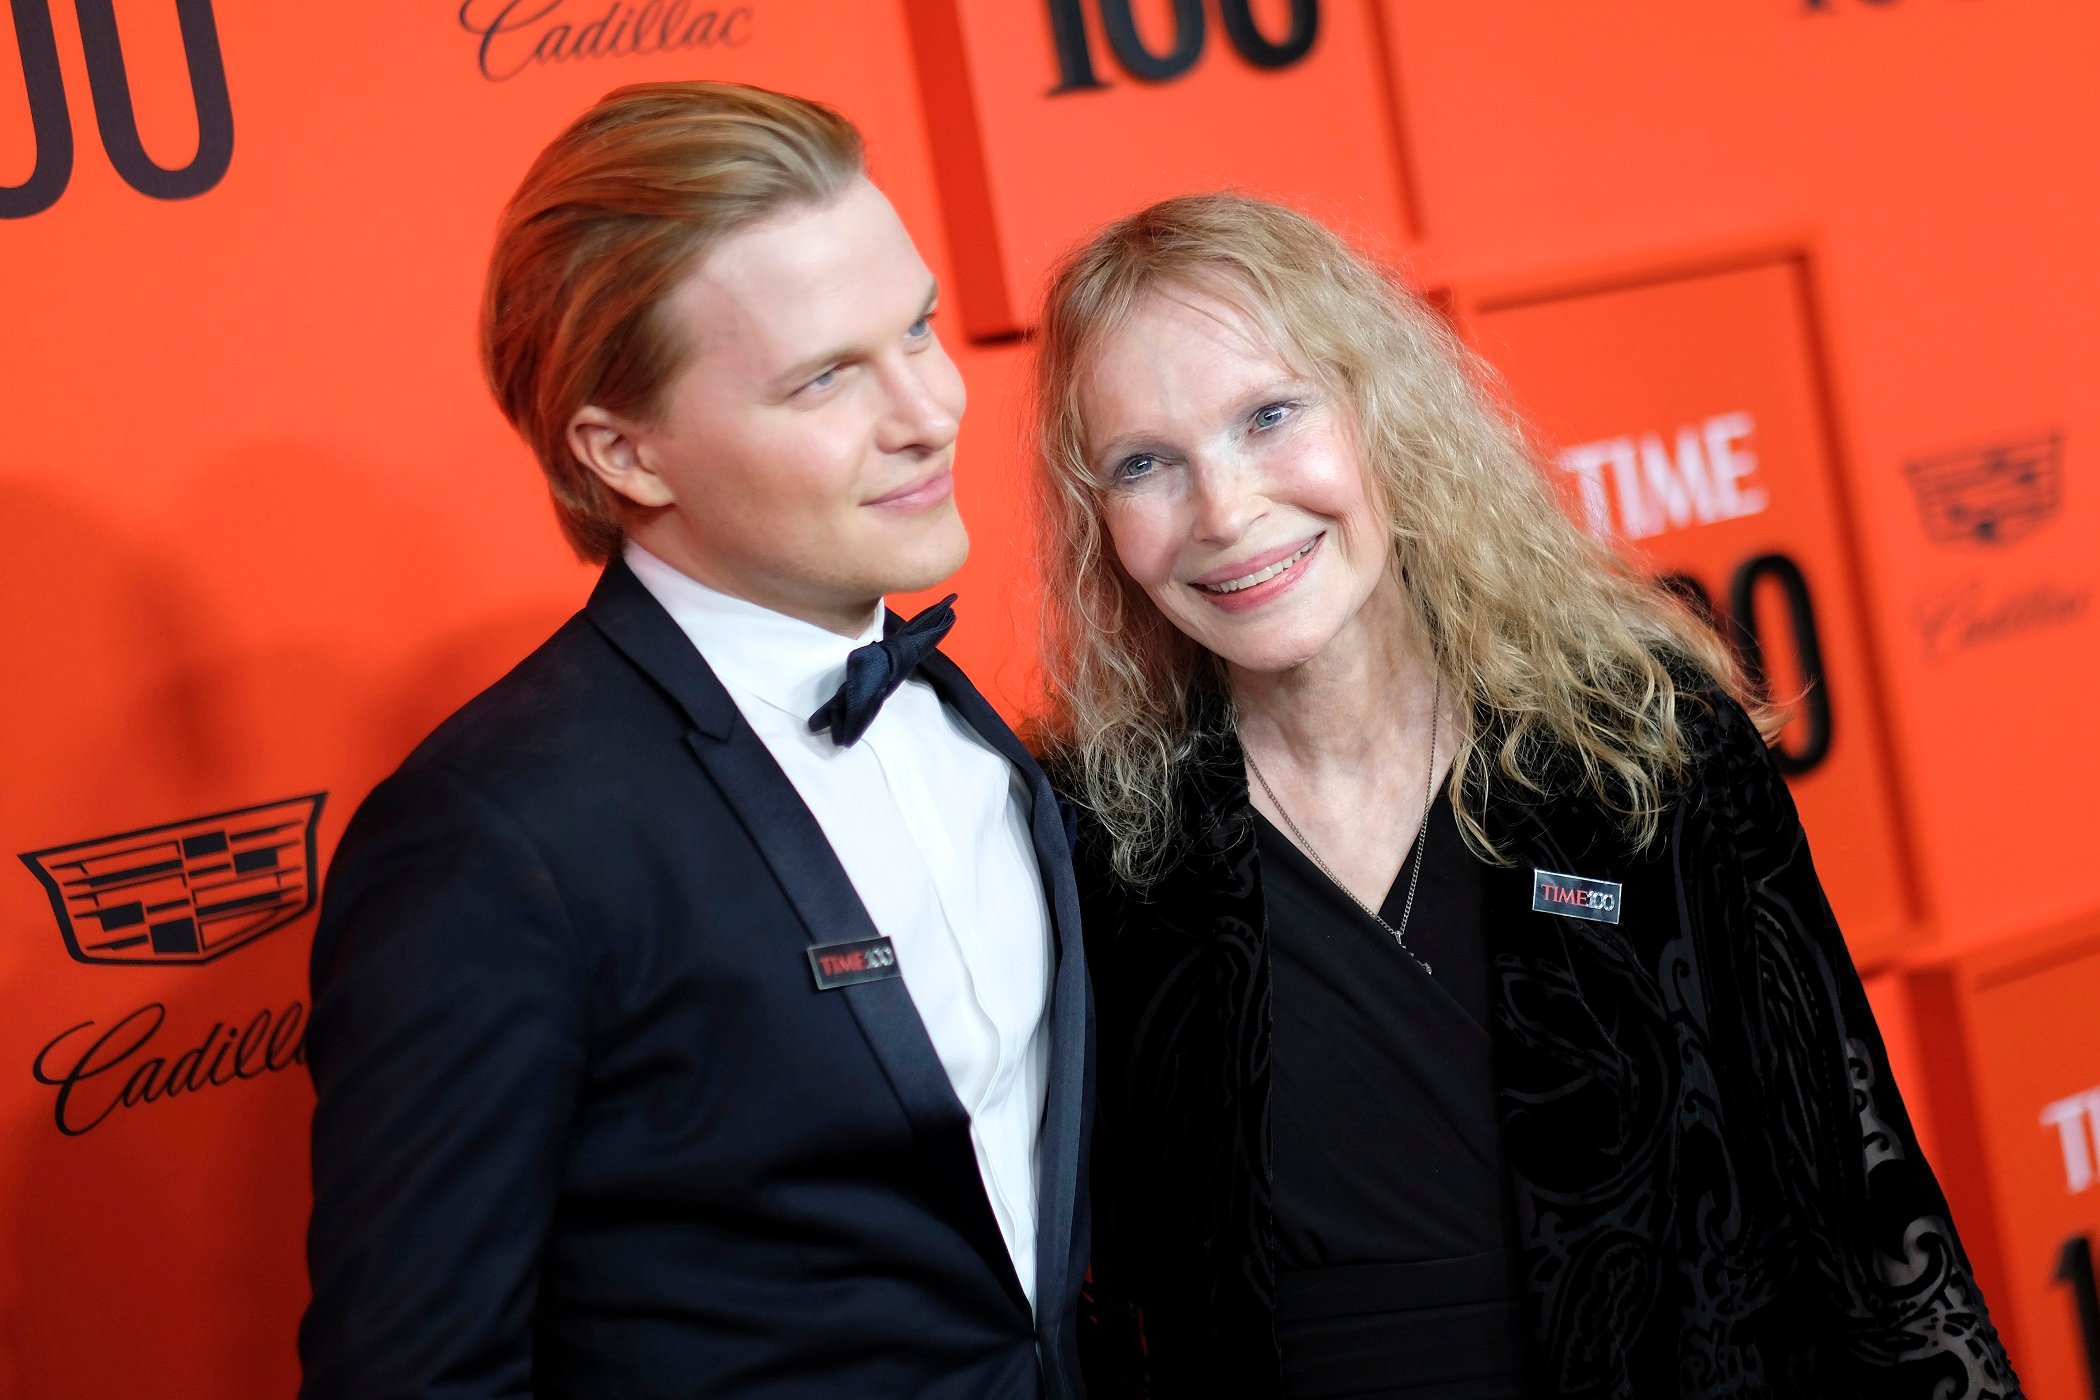 Ronan Farrow and Mia Farrow attend the TIME 100 Gala at Lincoln Center on April 23, 2019 in New York City